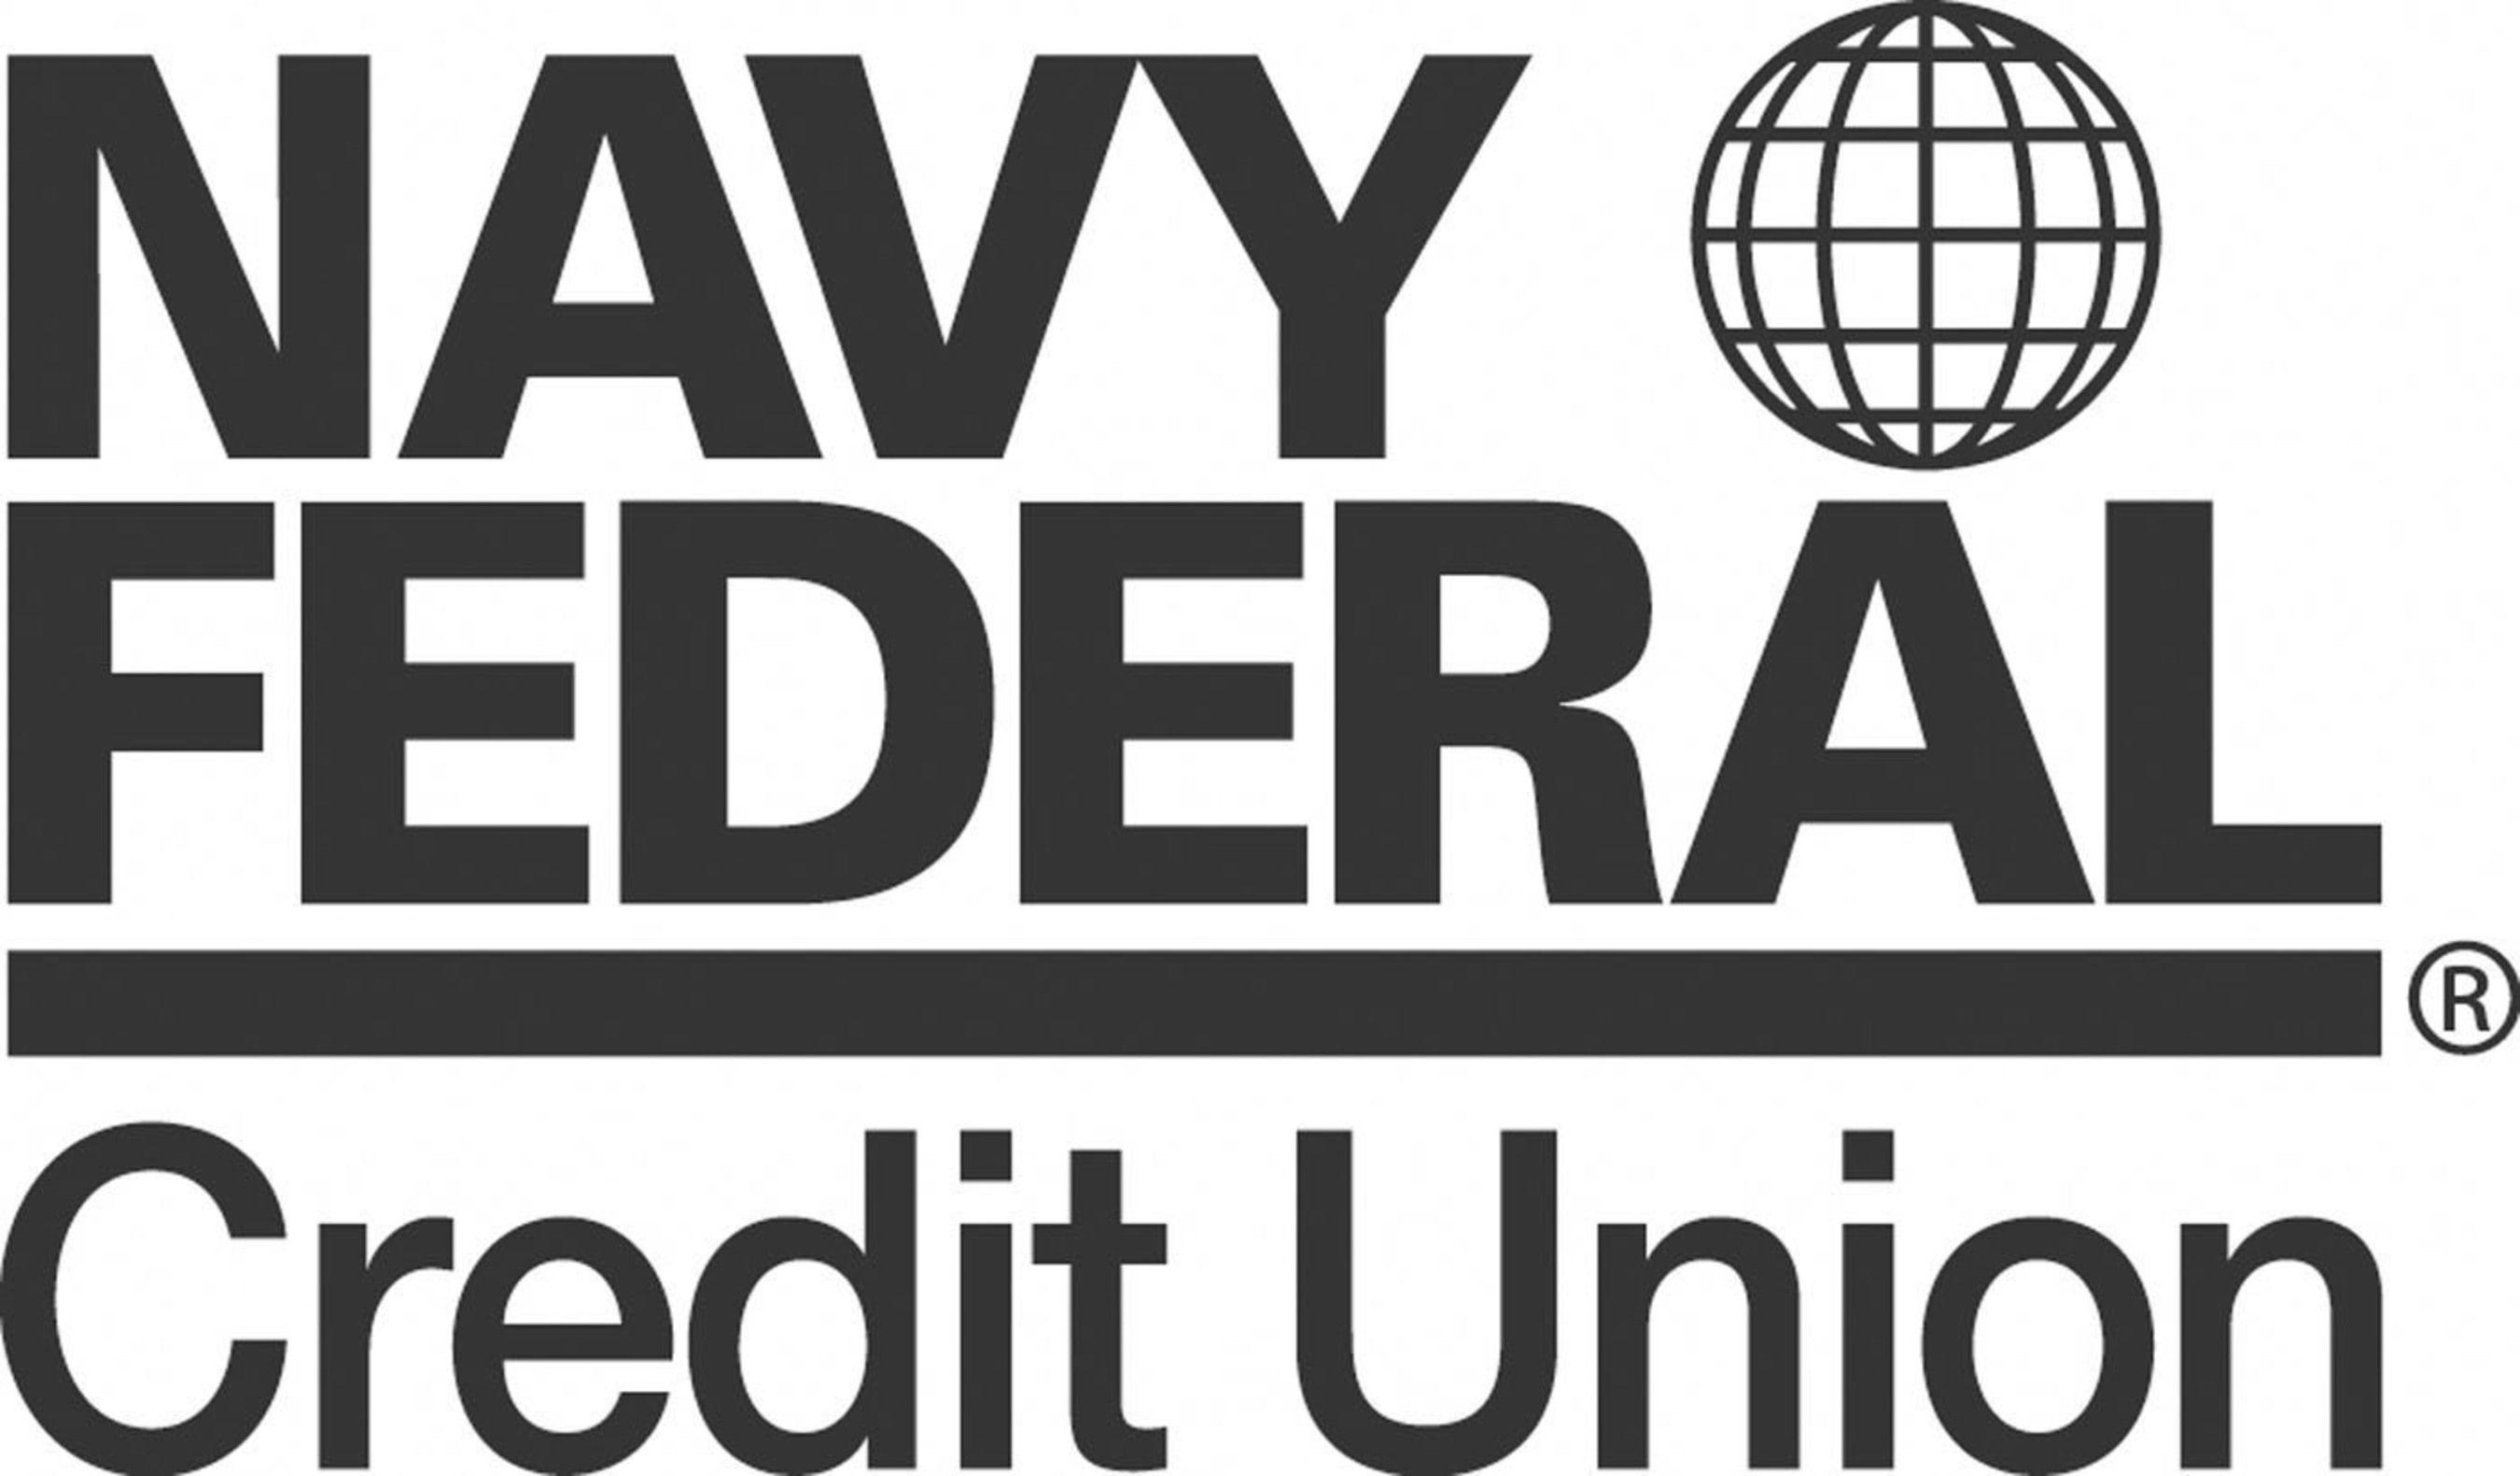 White Samsung Pay Logo - Navy Federal Adds Samsung Pay To Its Mobile Payment Options